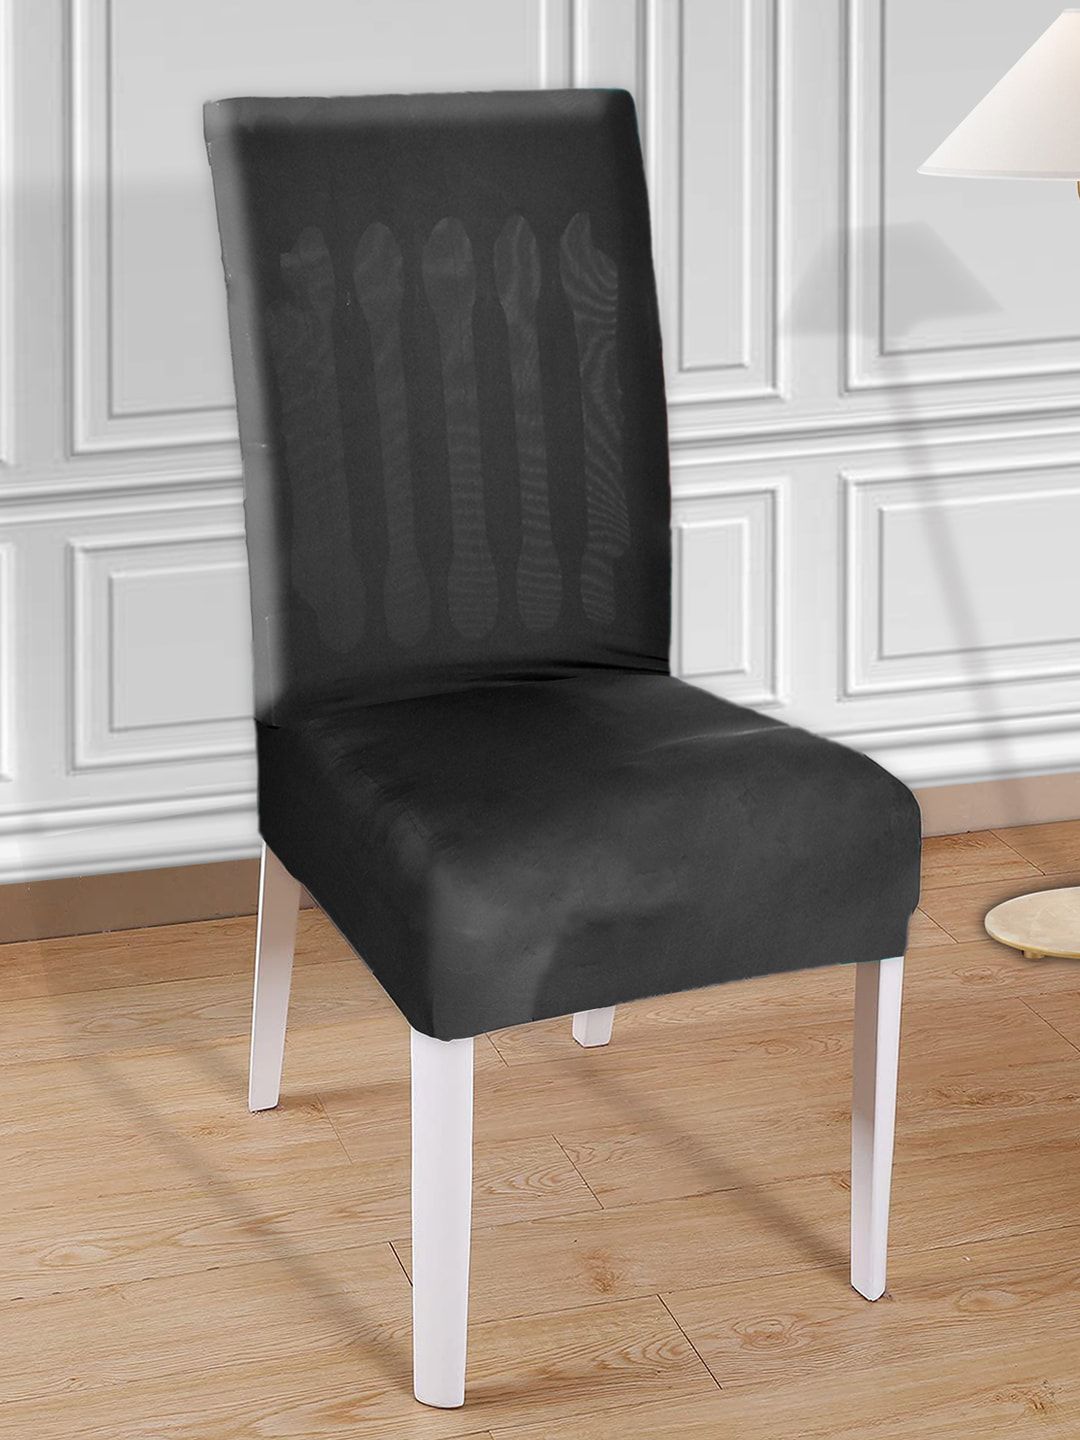 Kuber Industries Set Of 4 Black Solid Elastic Stretchable Chair Cover Price in India